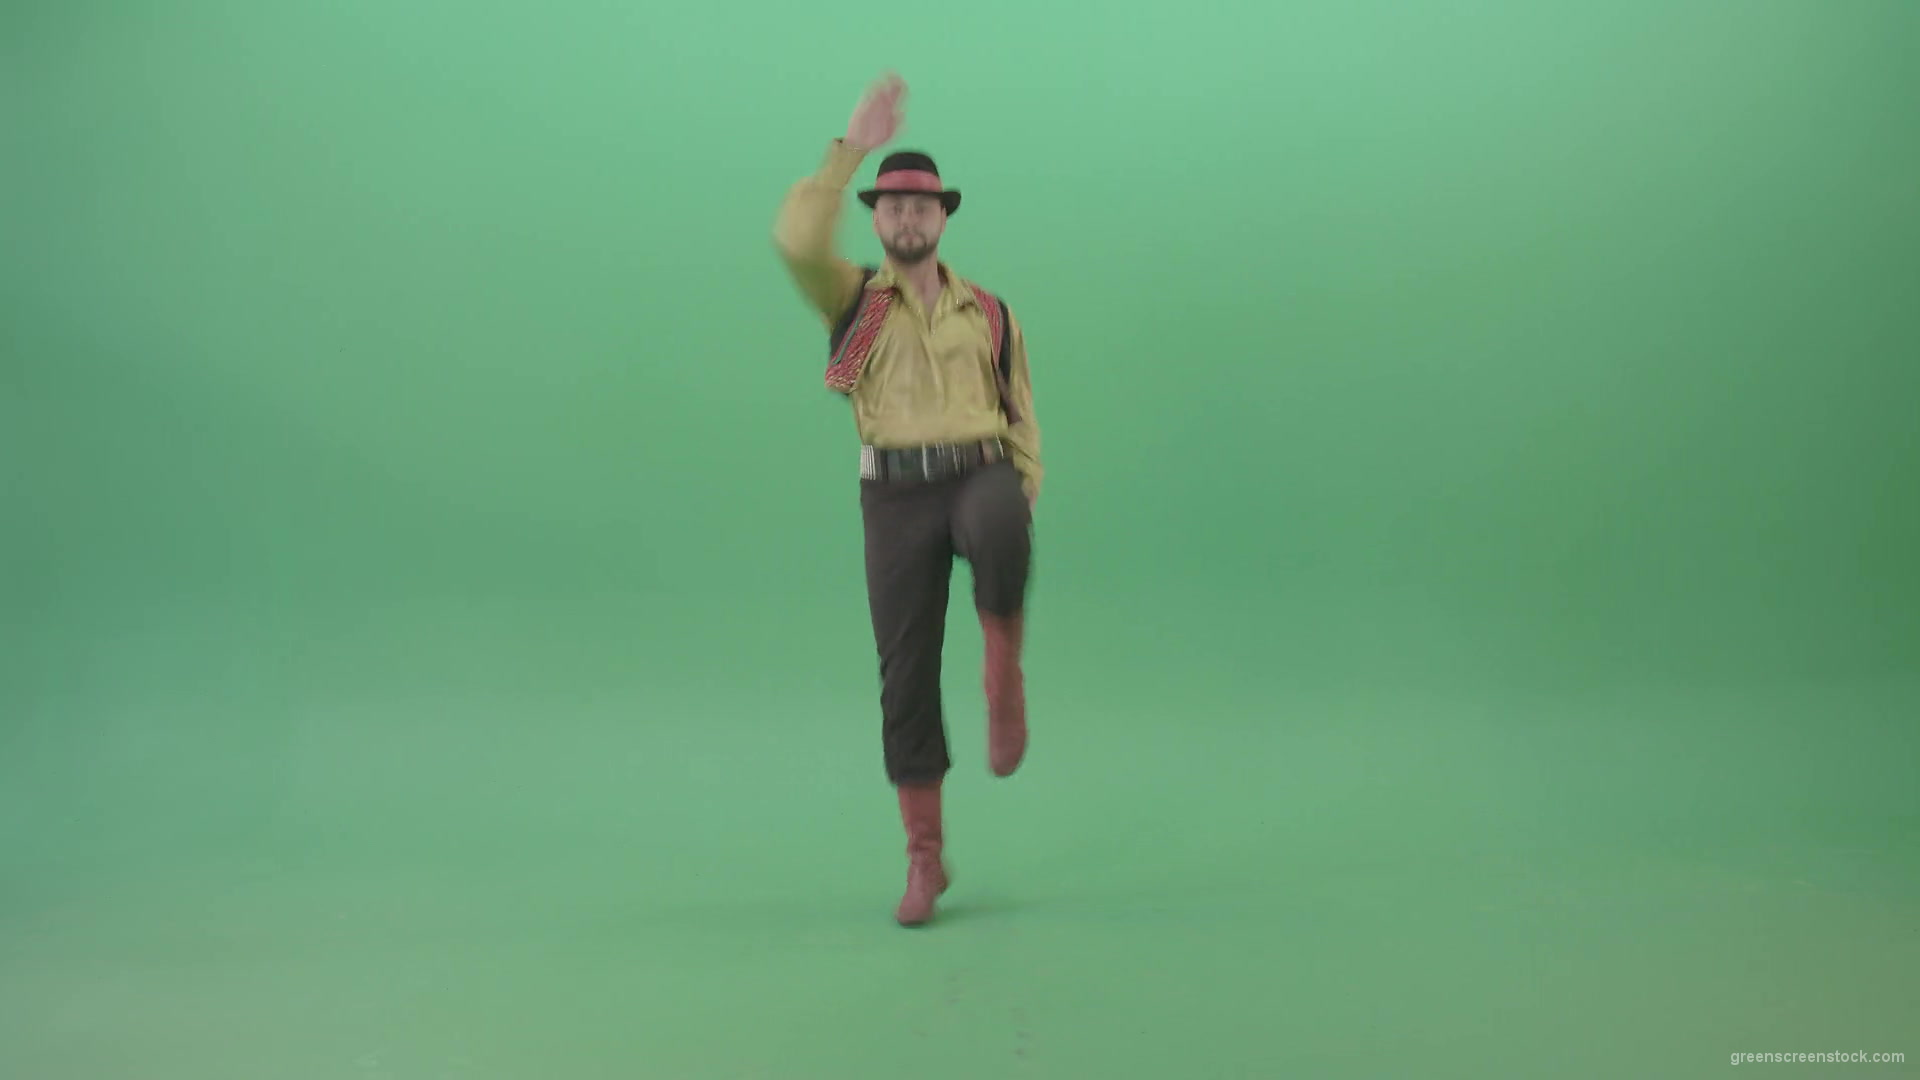 Funny-dancing-Gipsy-in-Moldova-jumping-isolated-on-Green-Screen-4K-Video-Footage-1920_008 Green Screen Stock